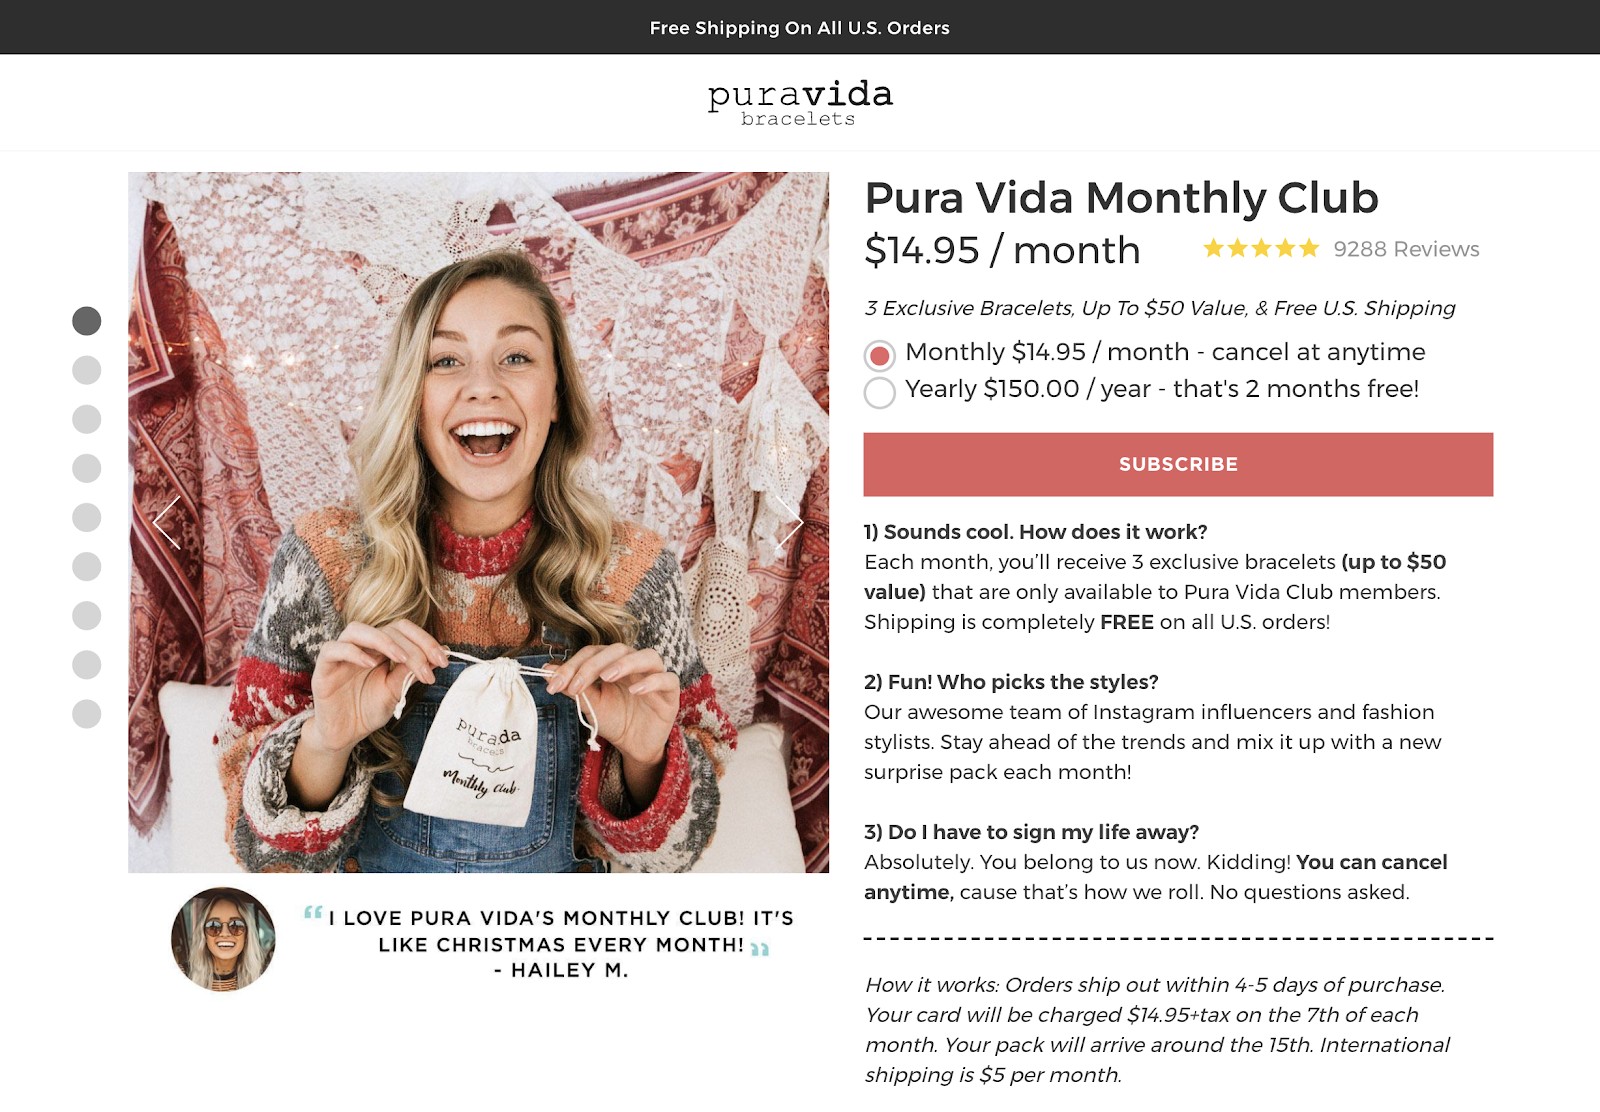 pura vida monthly club offer example social media engagement strategy